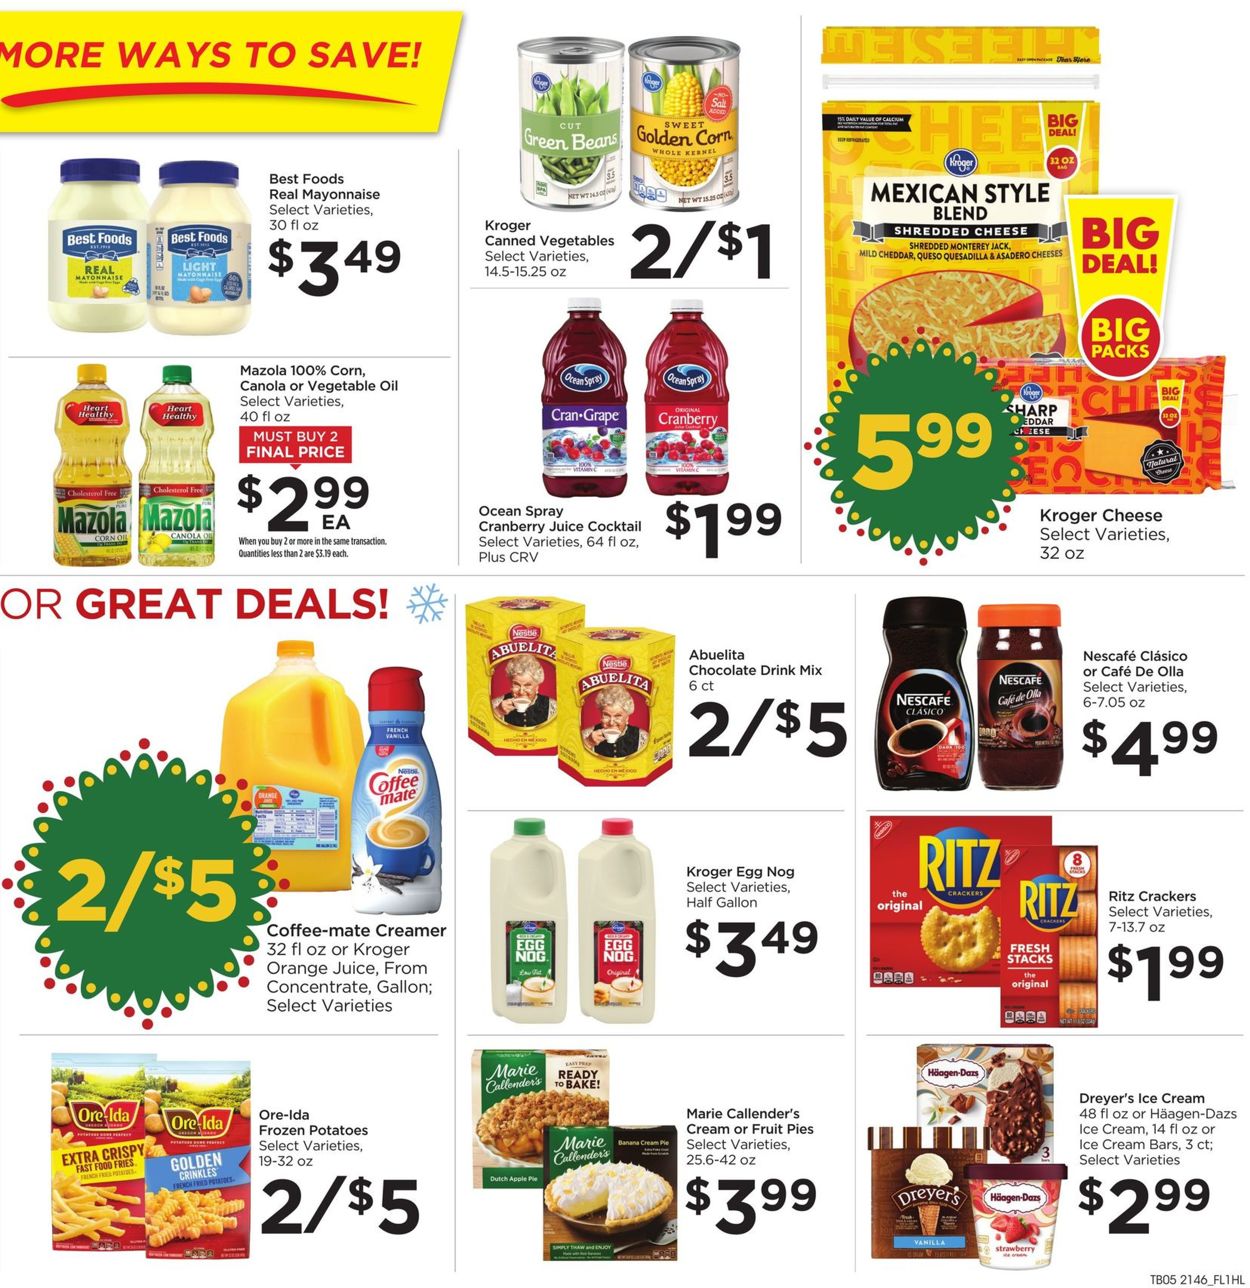 Catalogue Food 4 Less HOLIDAY 2021 from 12/15/2021